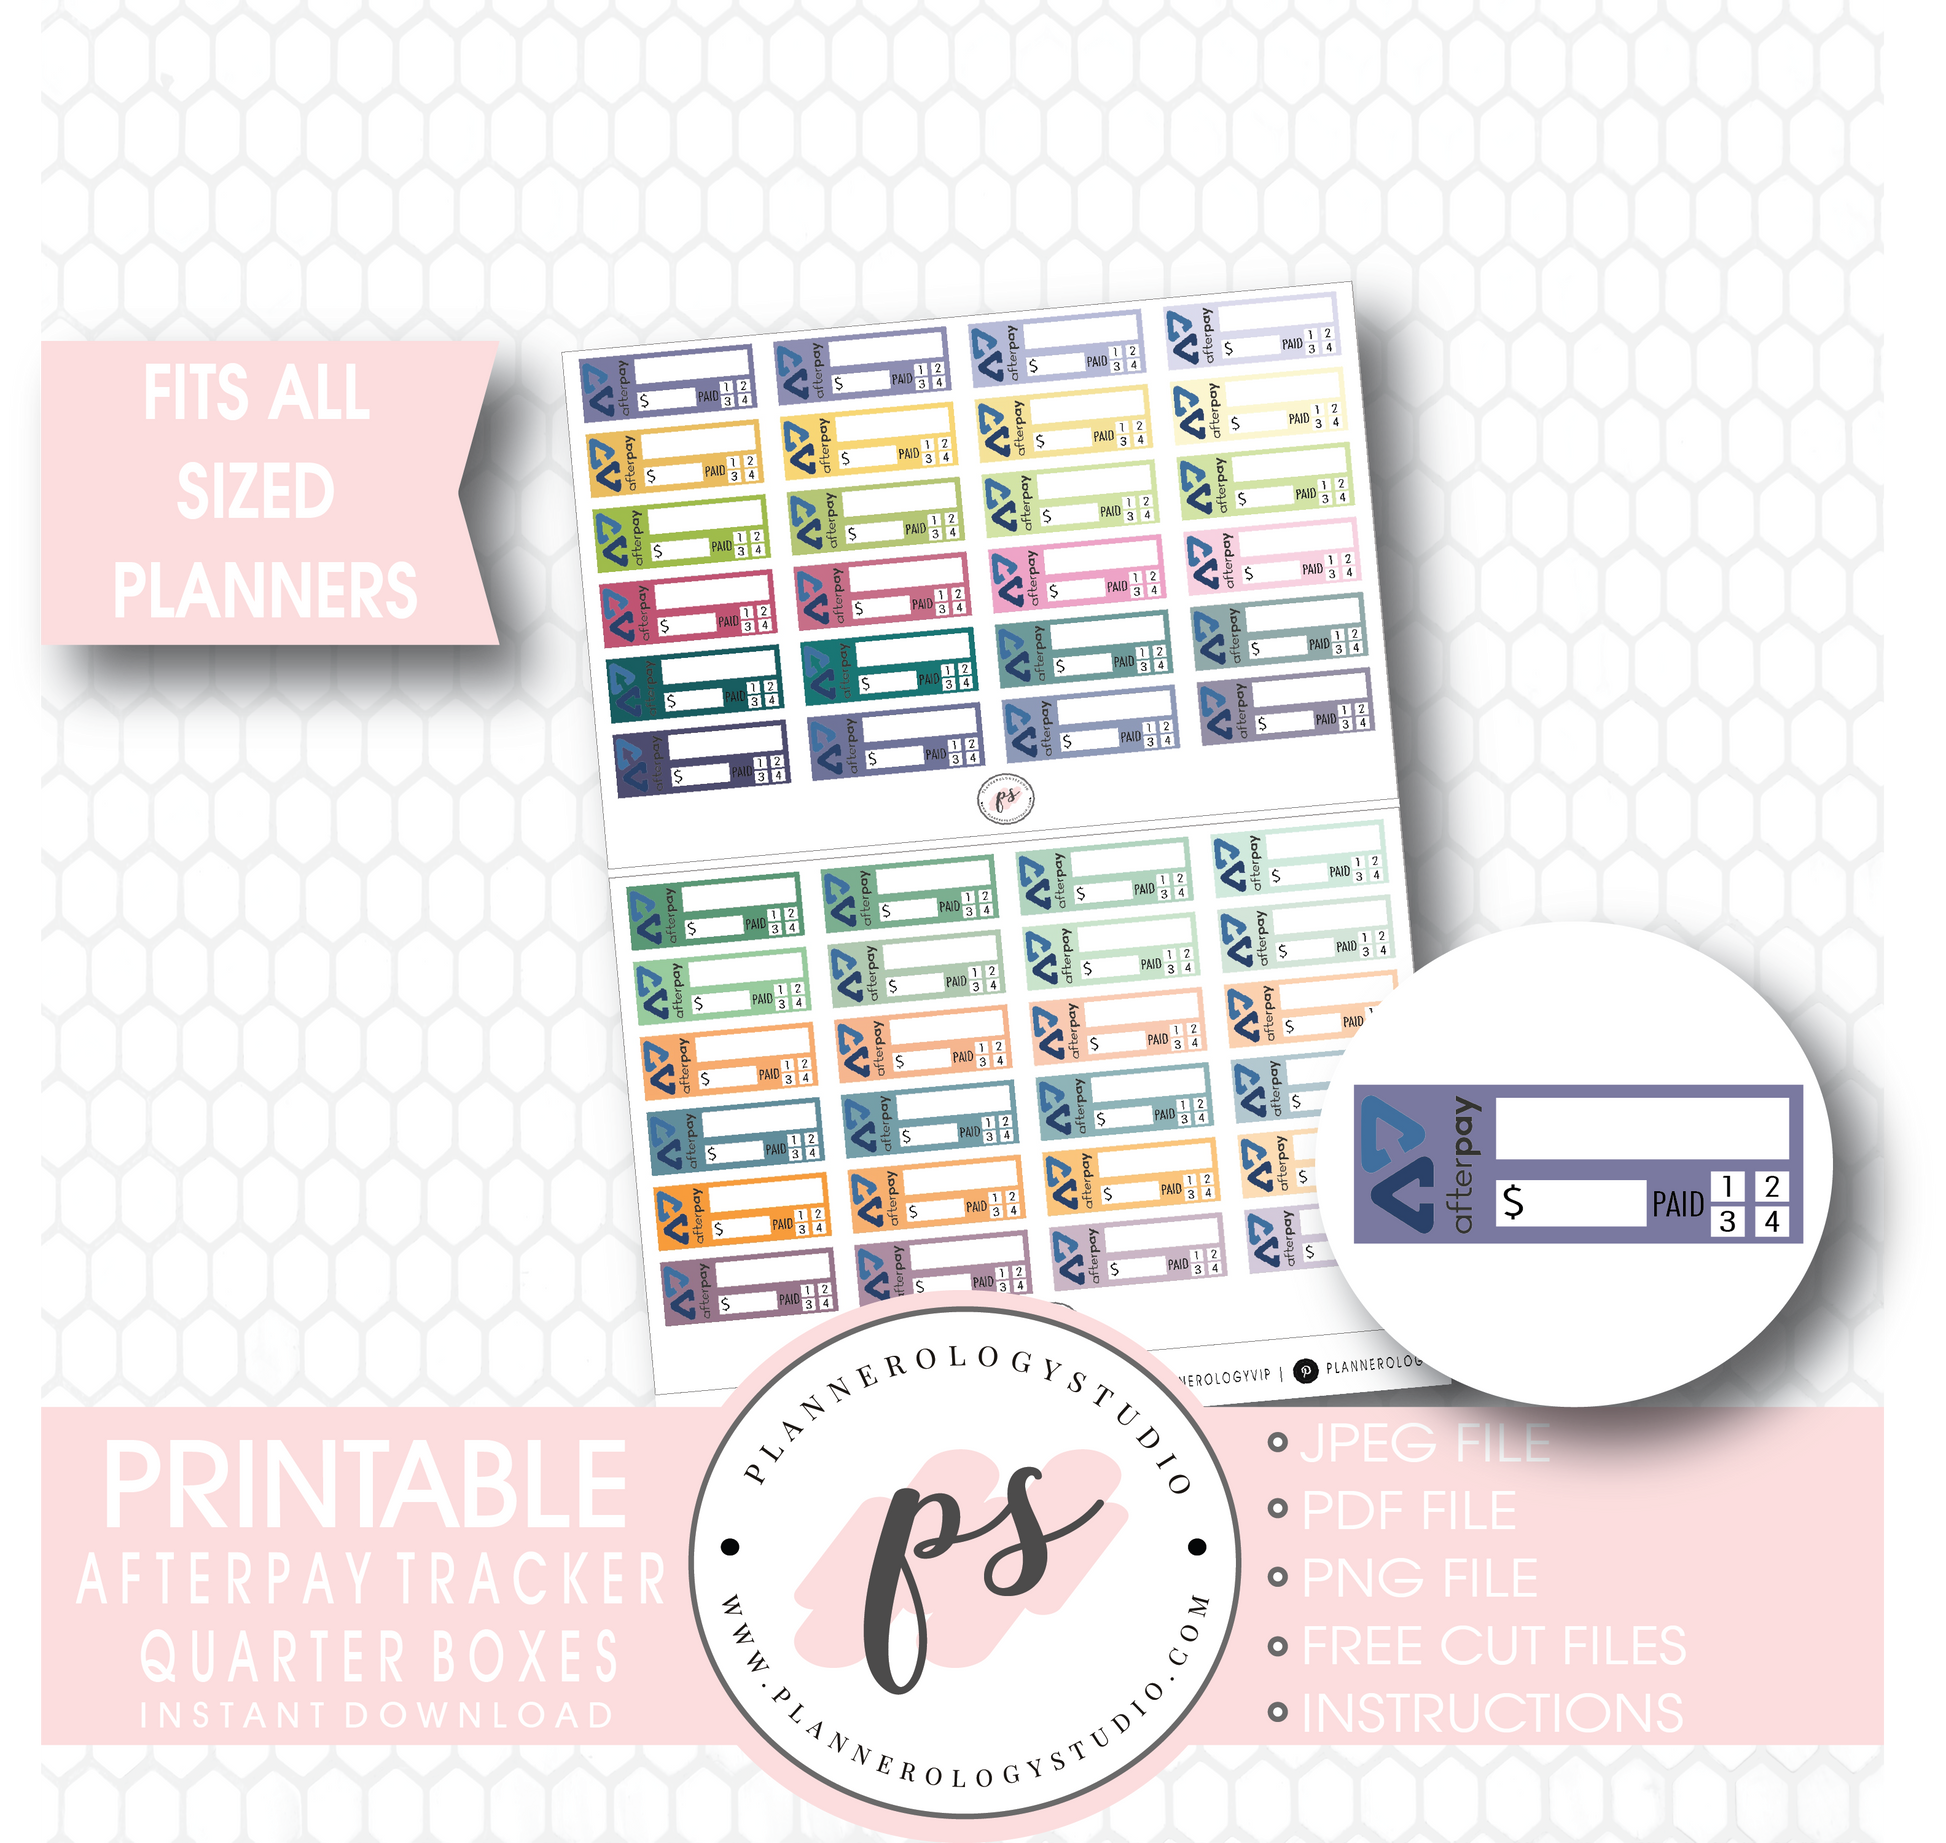 Afterpay Tracker Quarter Boxes Printable Planner Stickers - Plannerologystudio